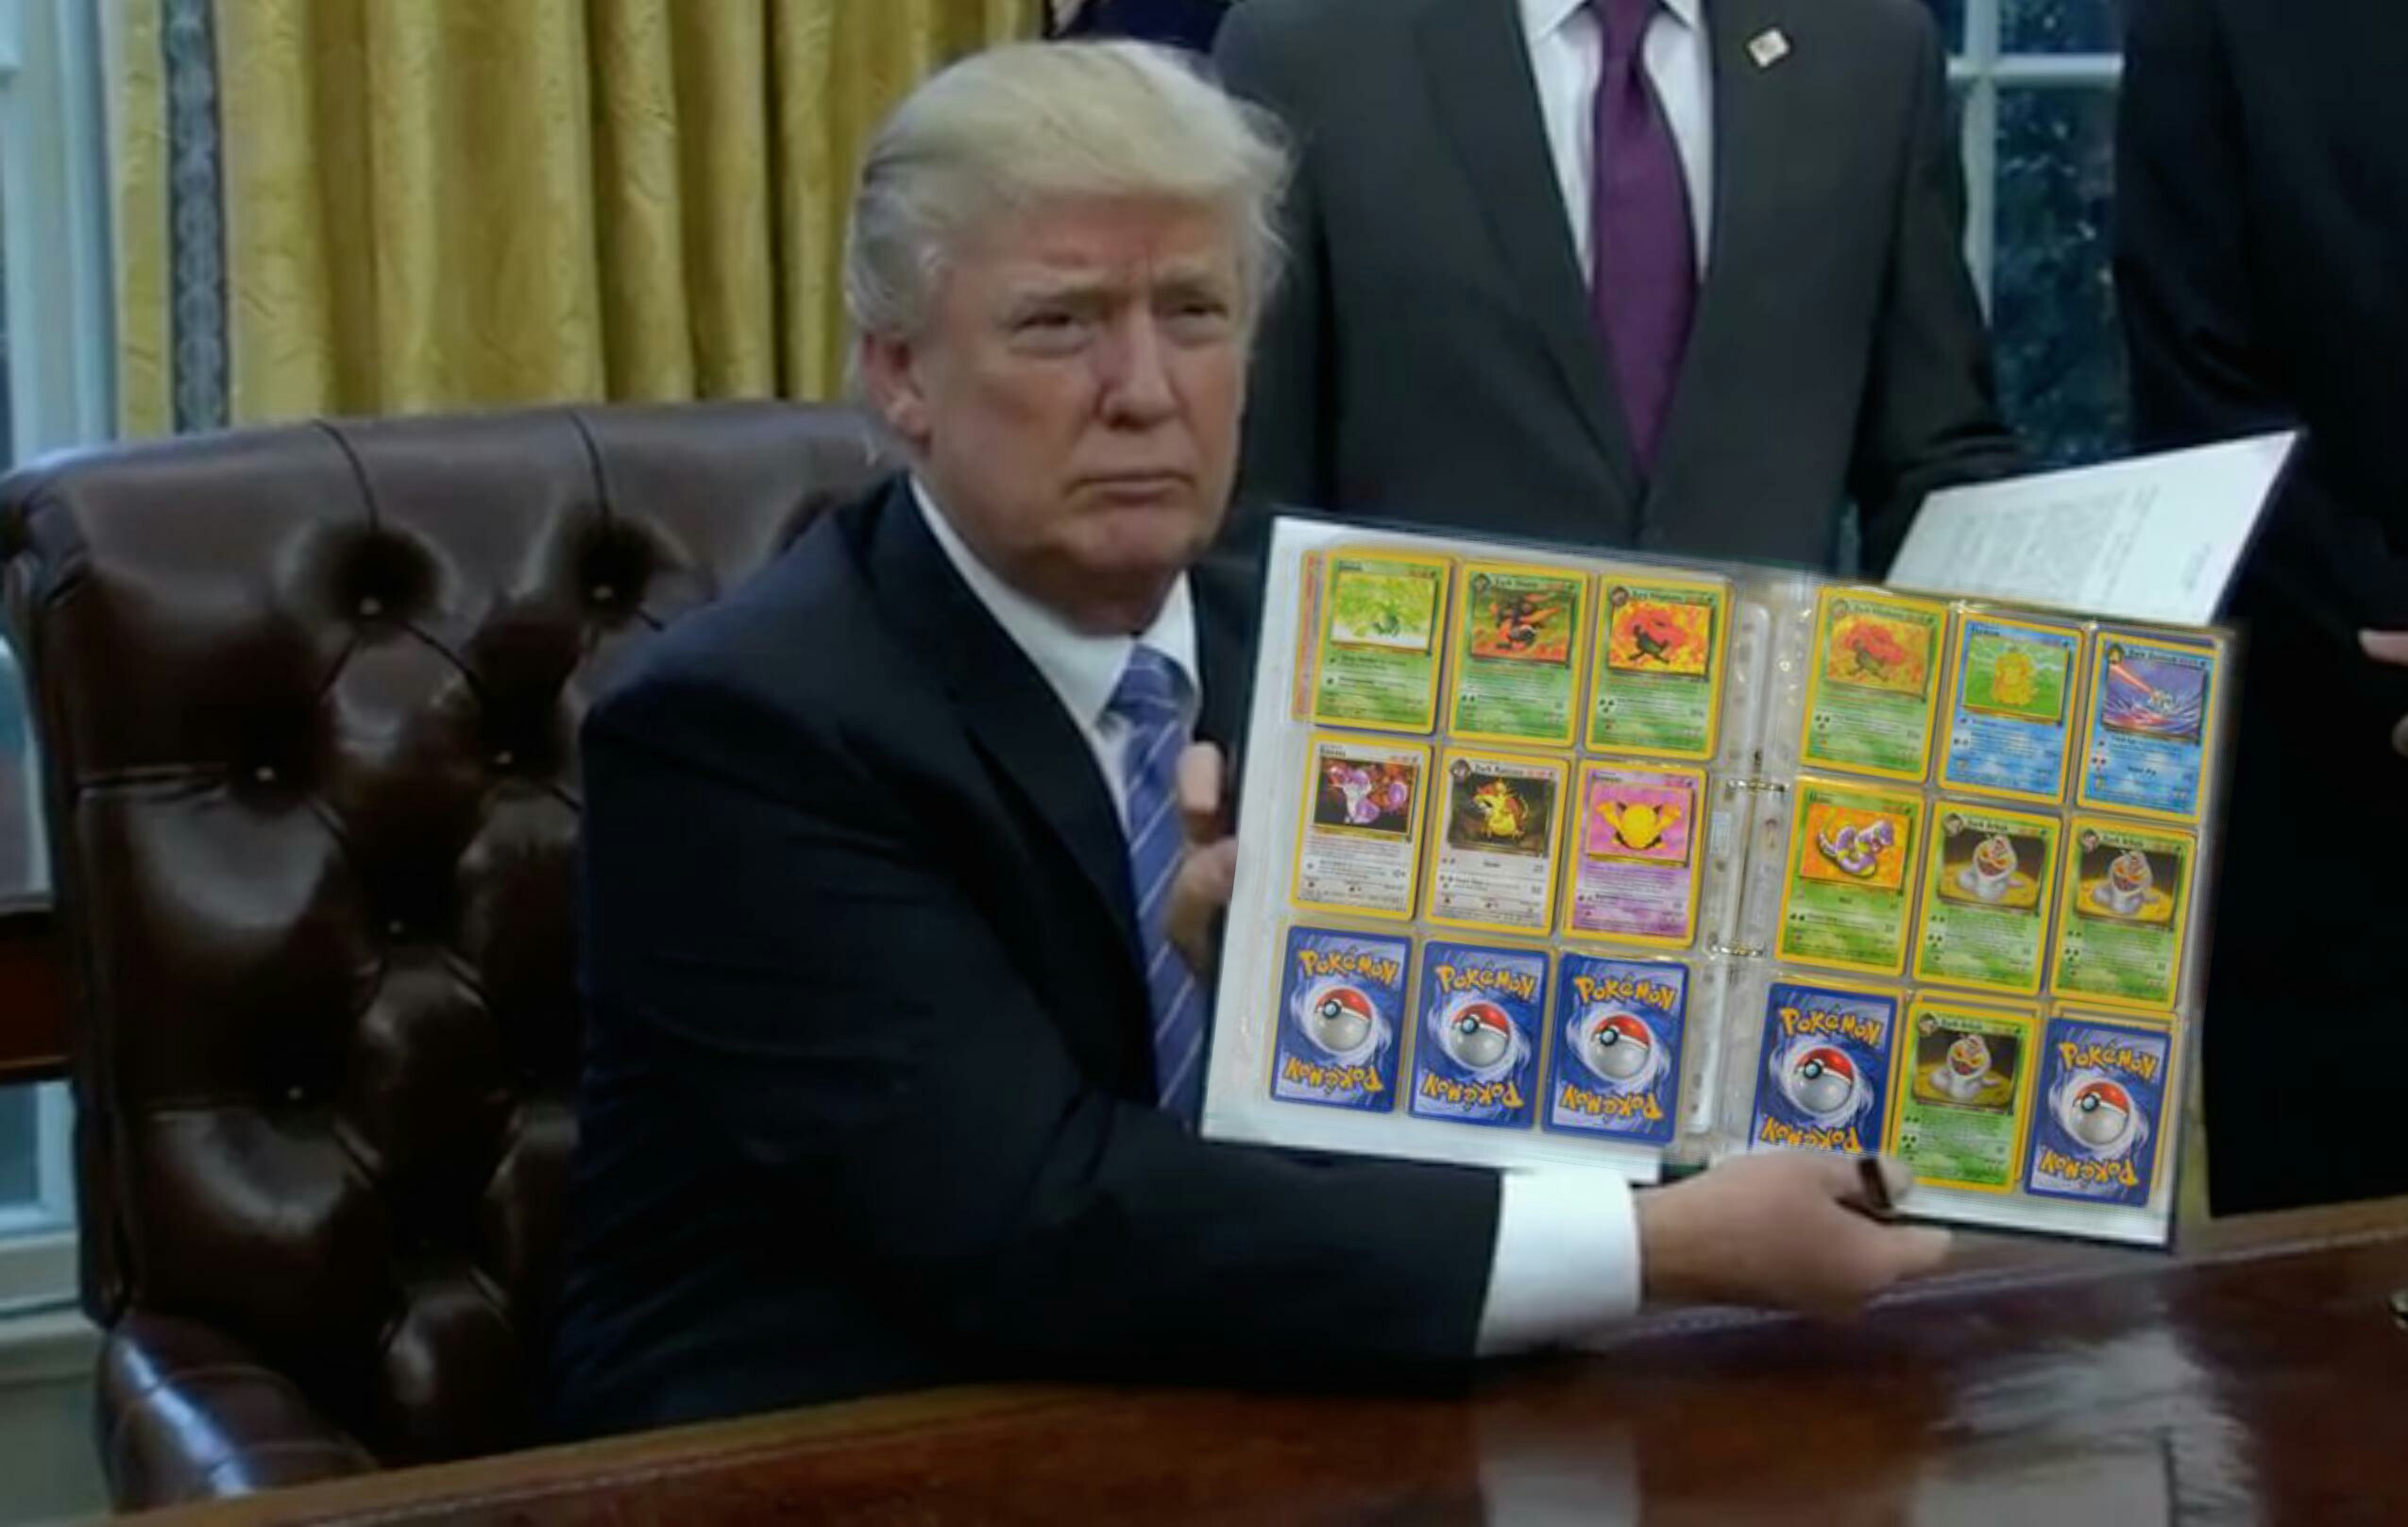 Donlad trump holding up a notebook of pokemon cards